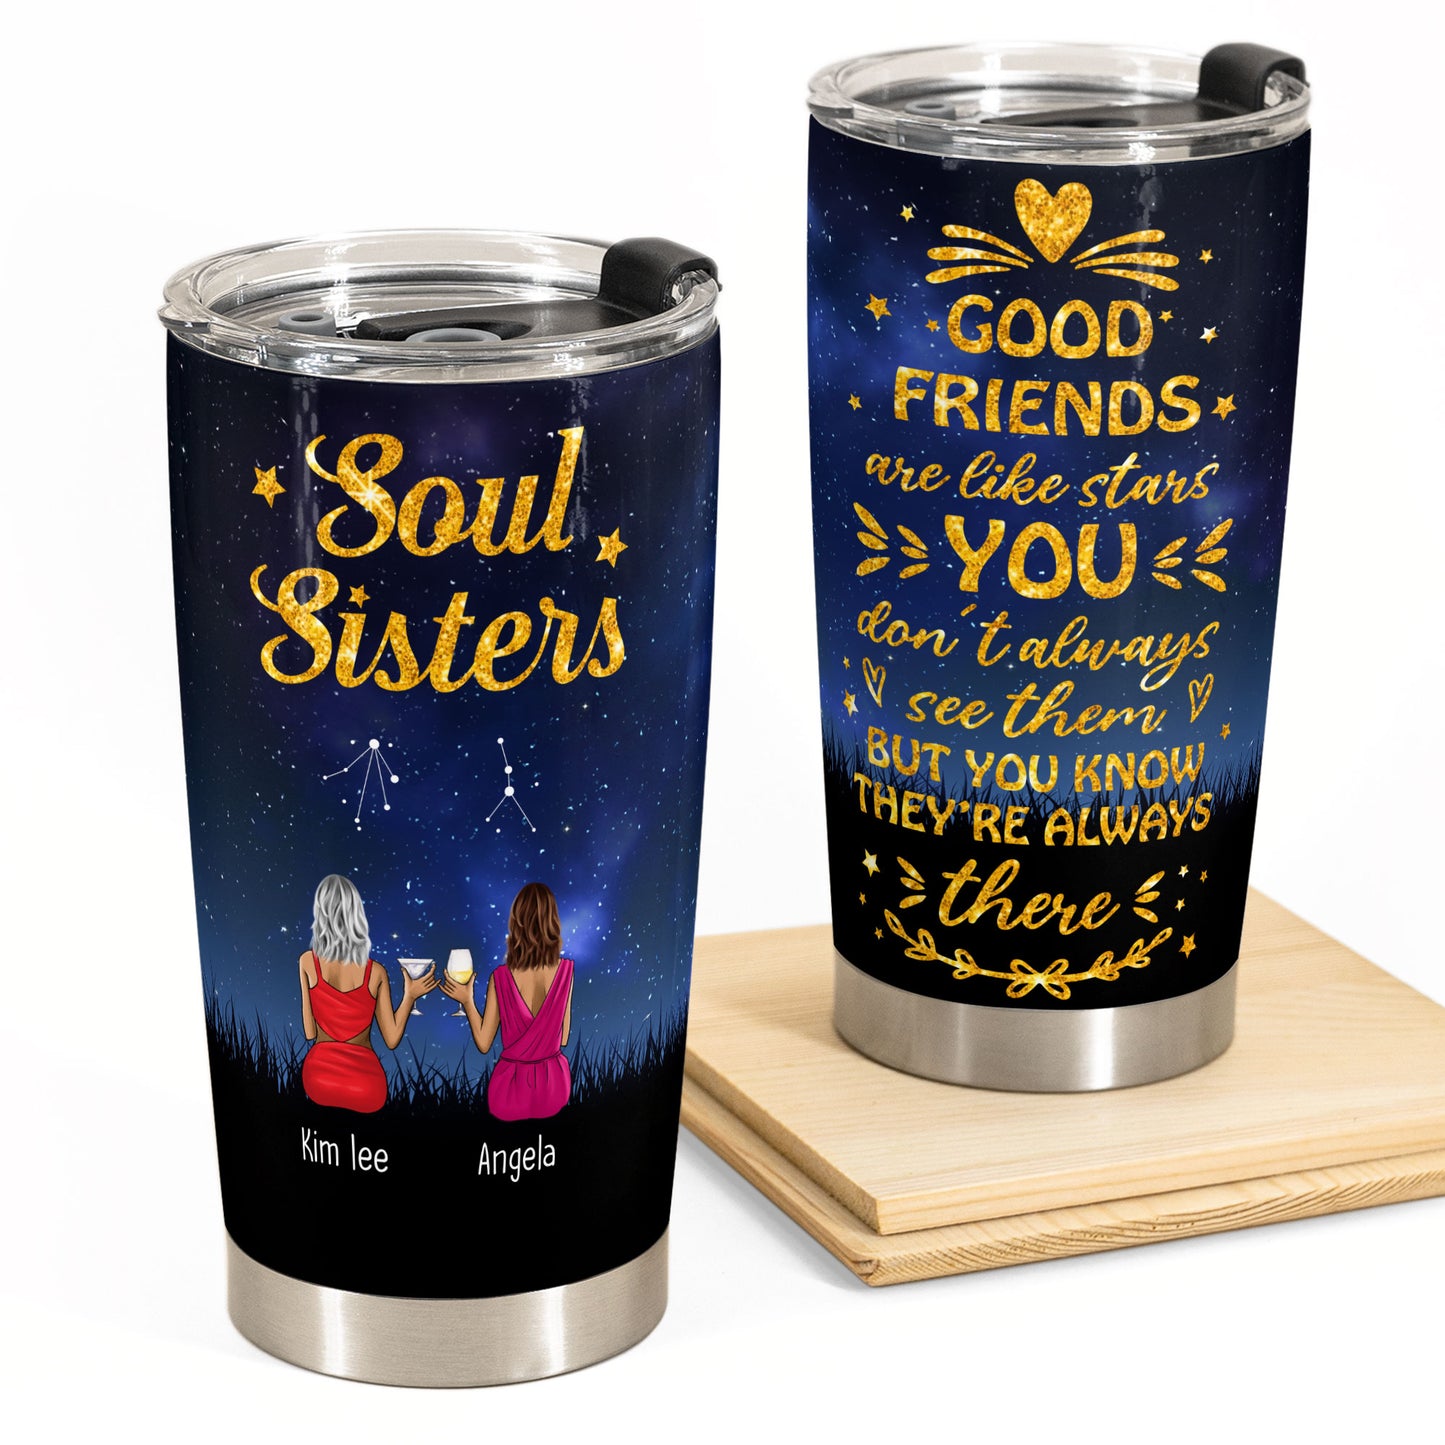 Good Friends Are Like Stars - Personalized Tumbler Cup - Gift For Friends - Ladies Sitting